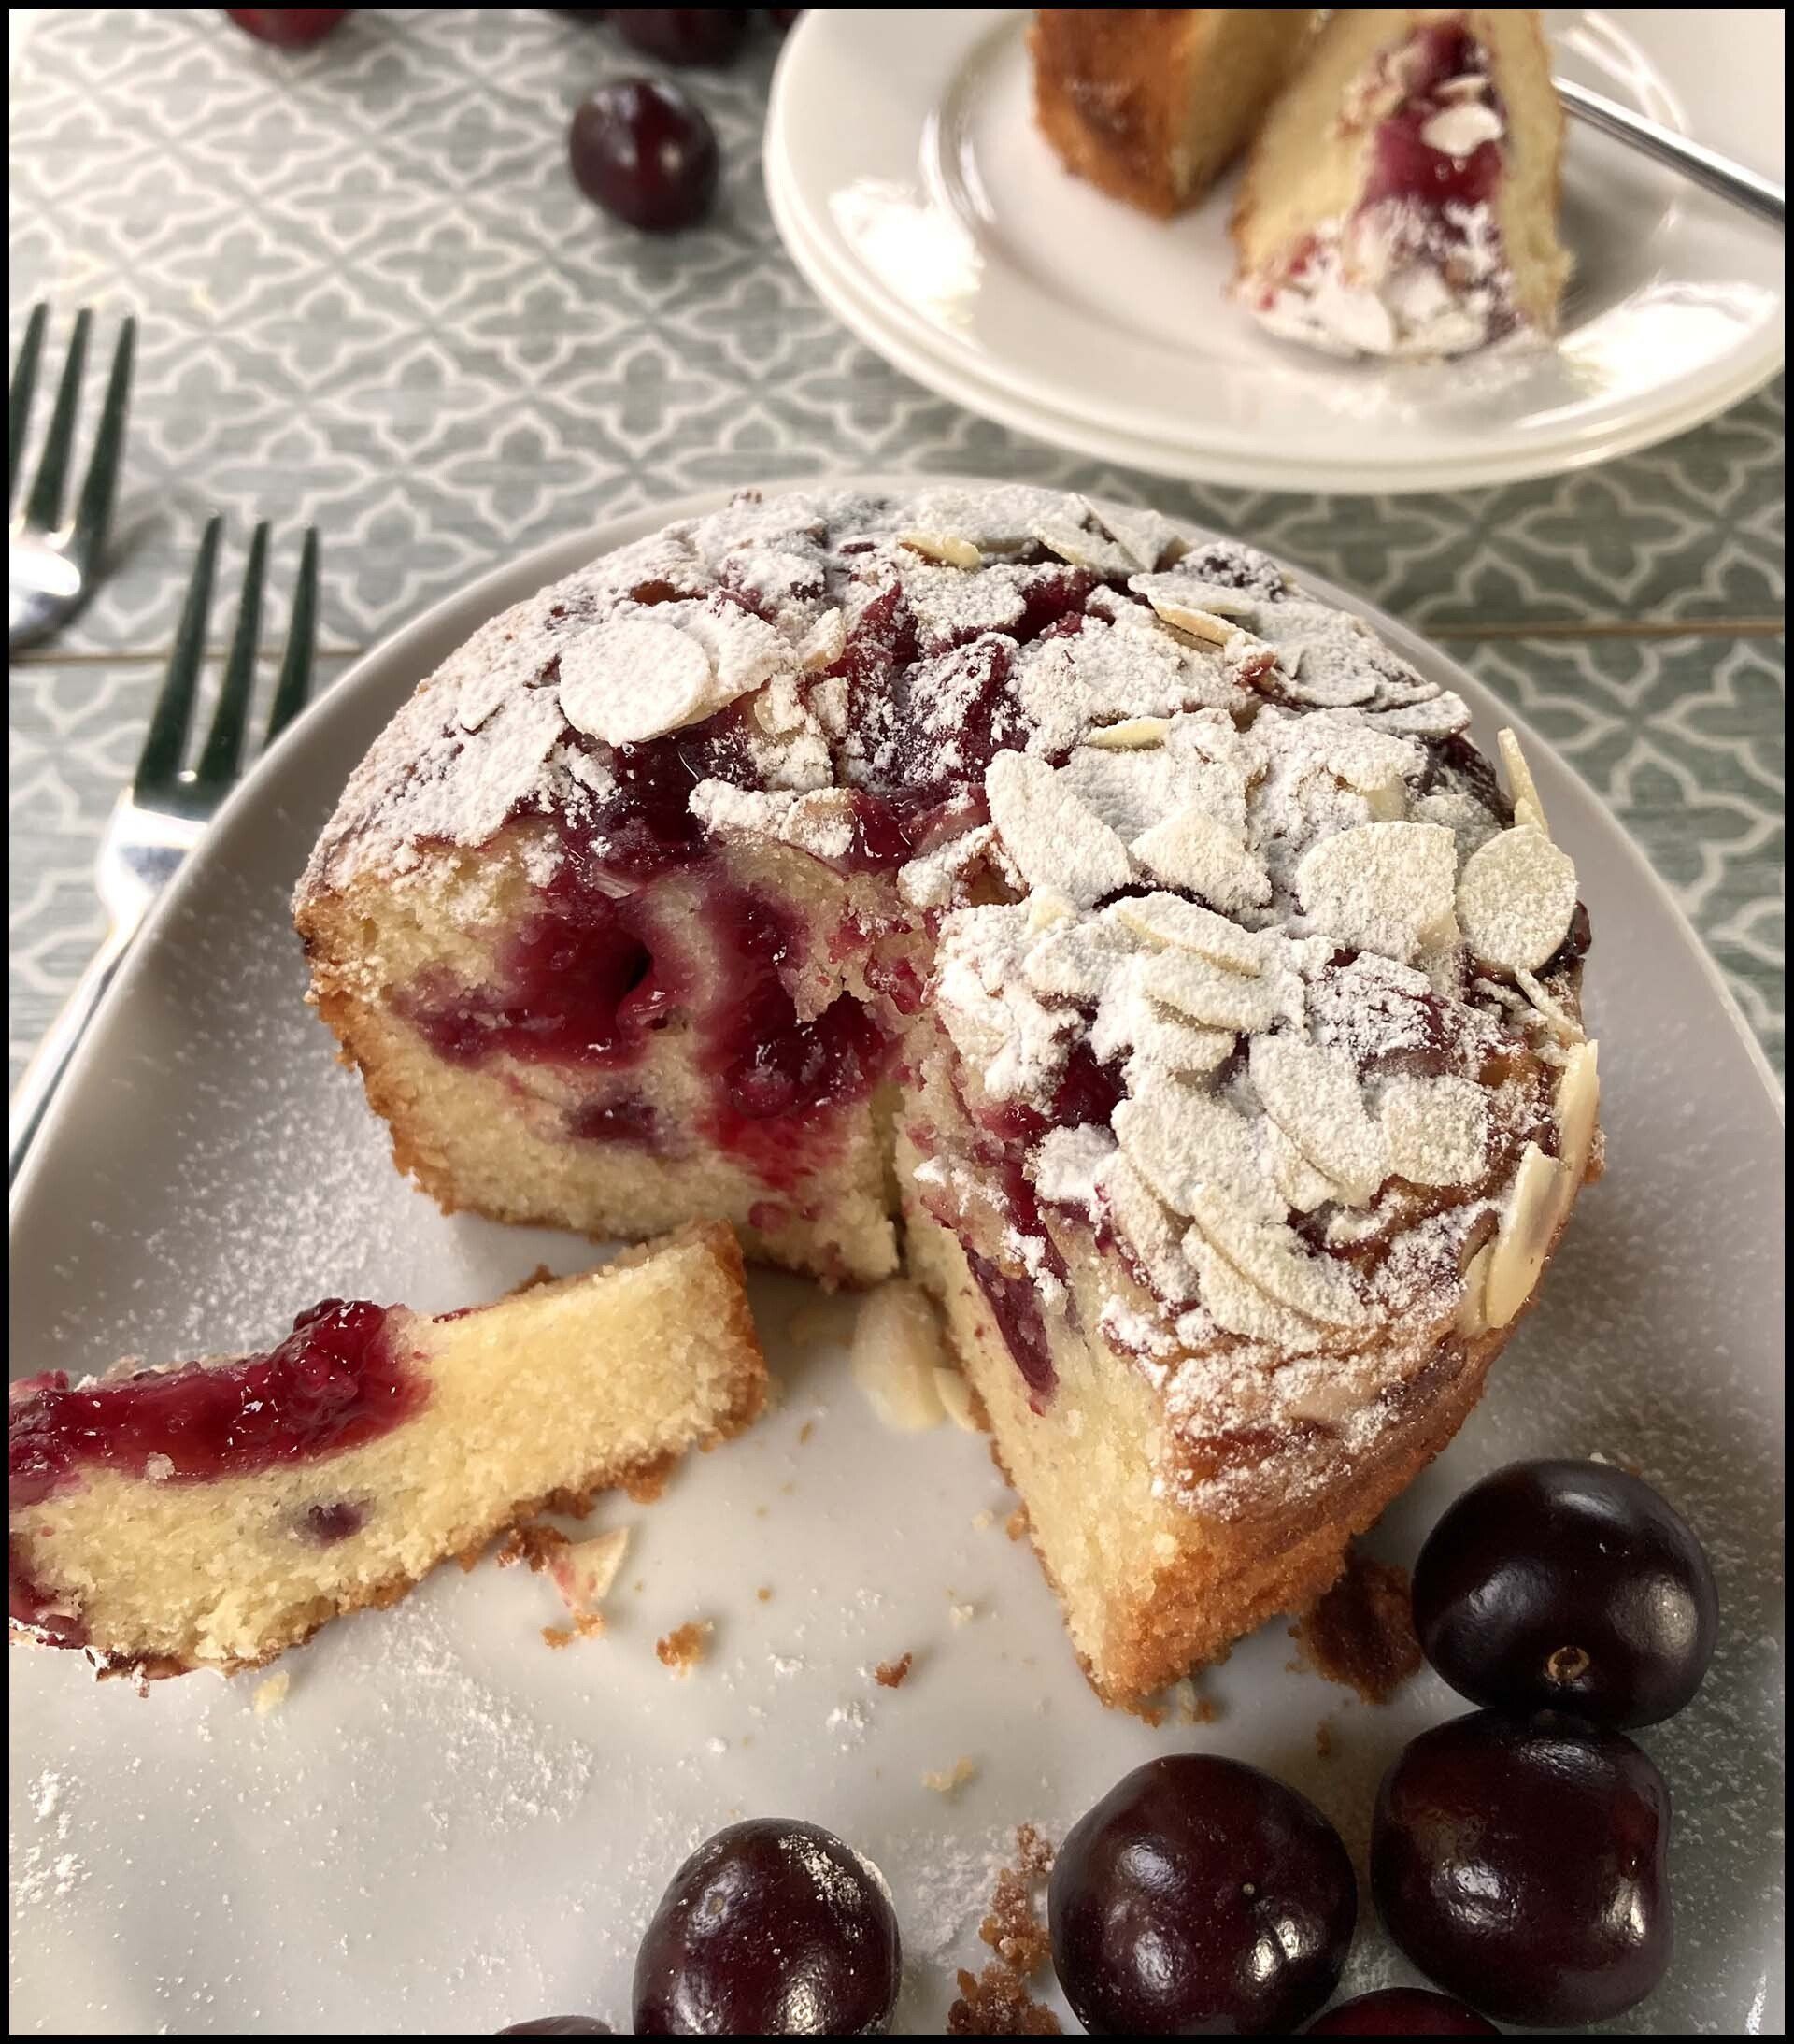 Cheery and Almond cake on a plate with cherries